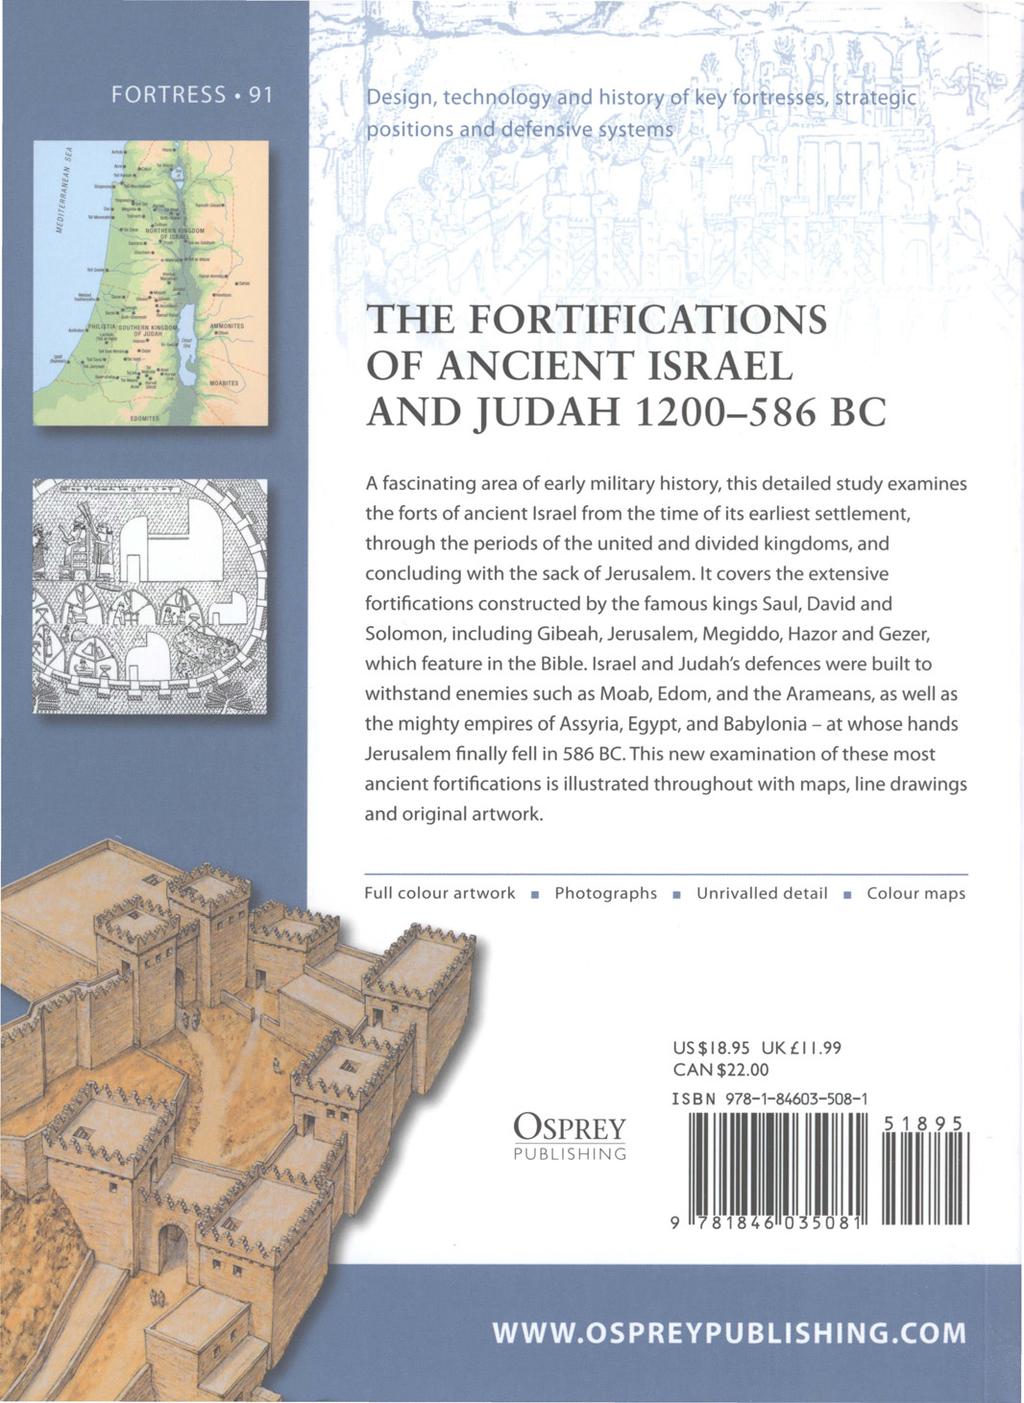 Design, technology and history of key fortresses, strategic positions and defensive systems THE FORTIFICATIONS OF ANCIENT ISRAEL AND JUDAH 1200-586 BC A fascinating area of early military history,